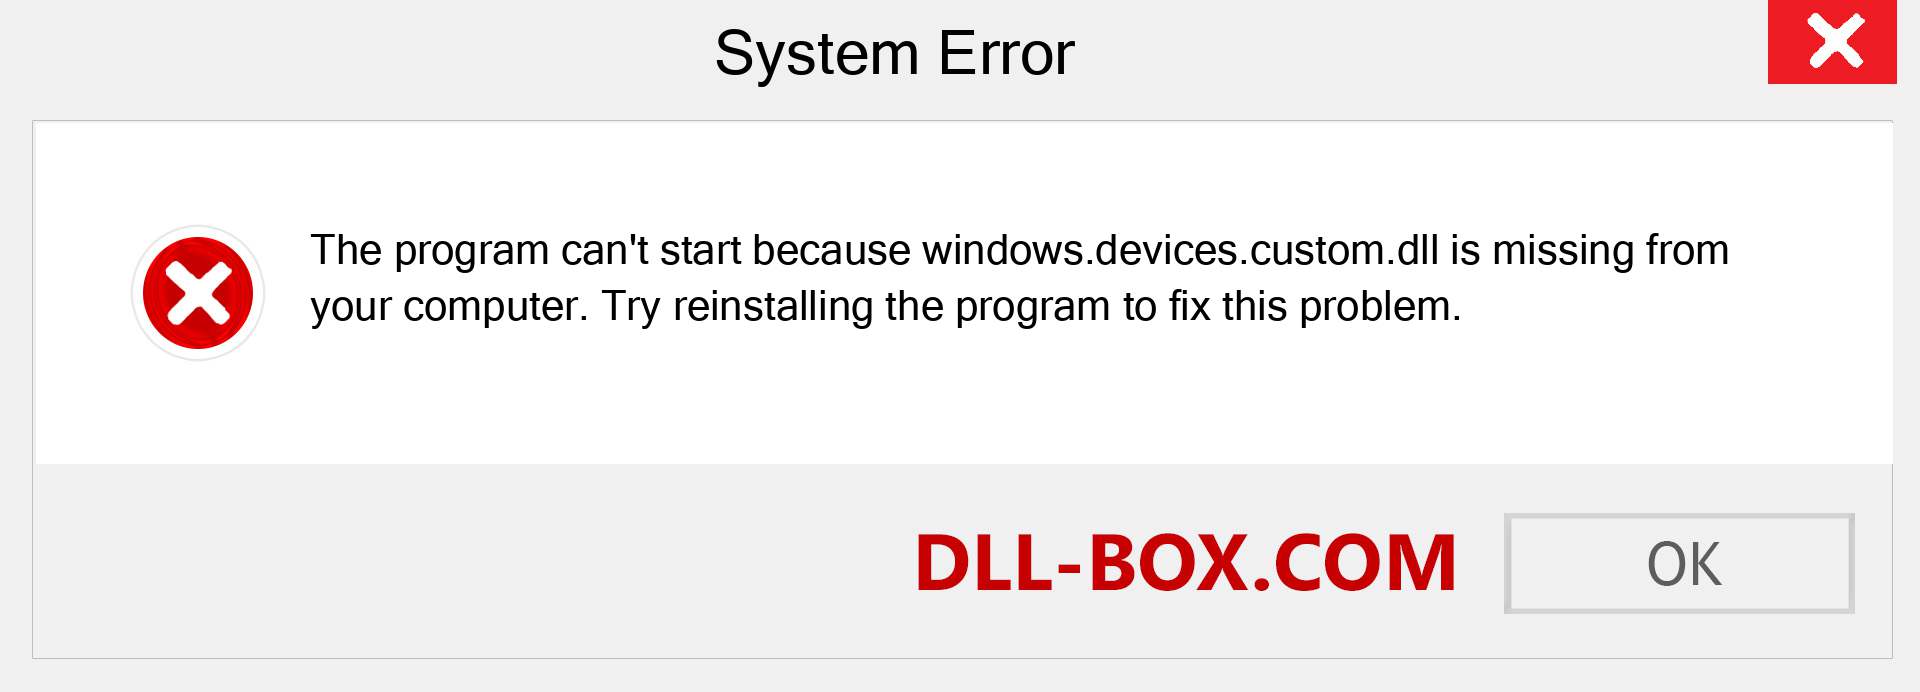  windows.devices.custom.dll file is missing?. Download for Windows 7, 8, 10 - Fix  windows.devices.custom dll Missing Error on Windows, photos, images